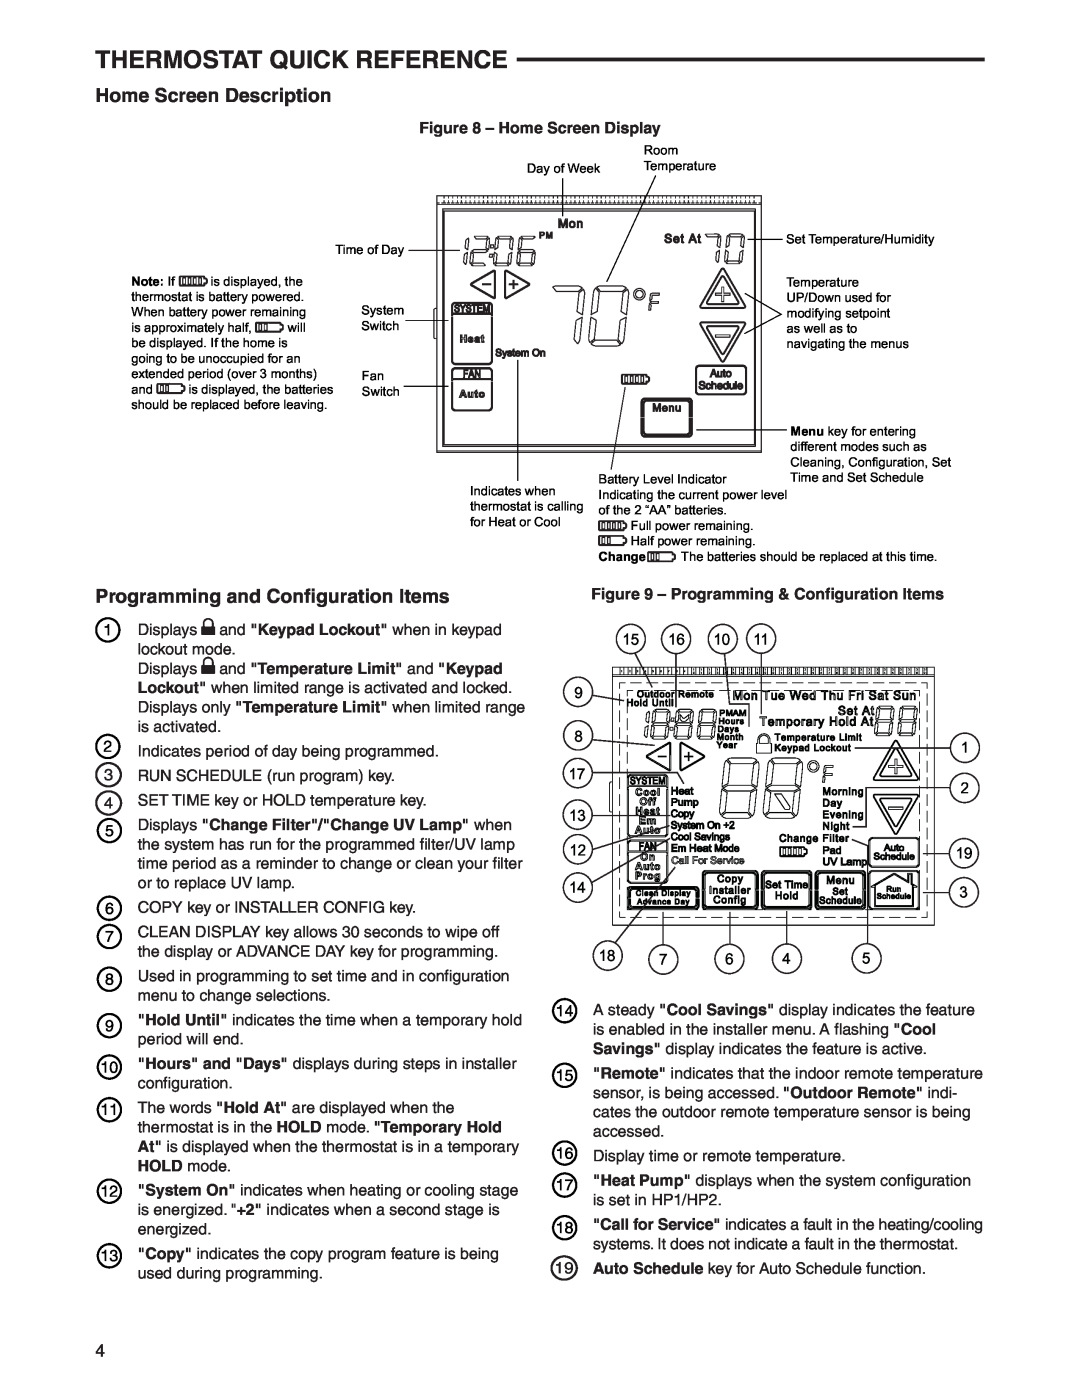 White Rodgers 1F95-1280 Thermostat Quick Reference, Home Screen Description, Programming and Conﬁguration Items 